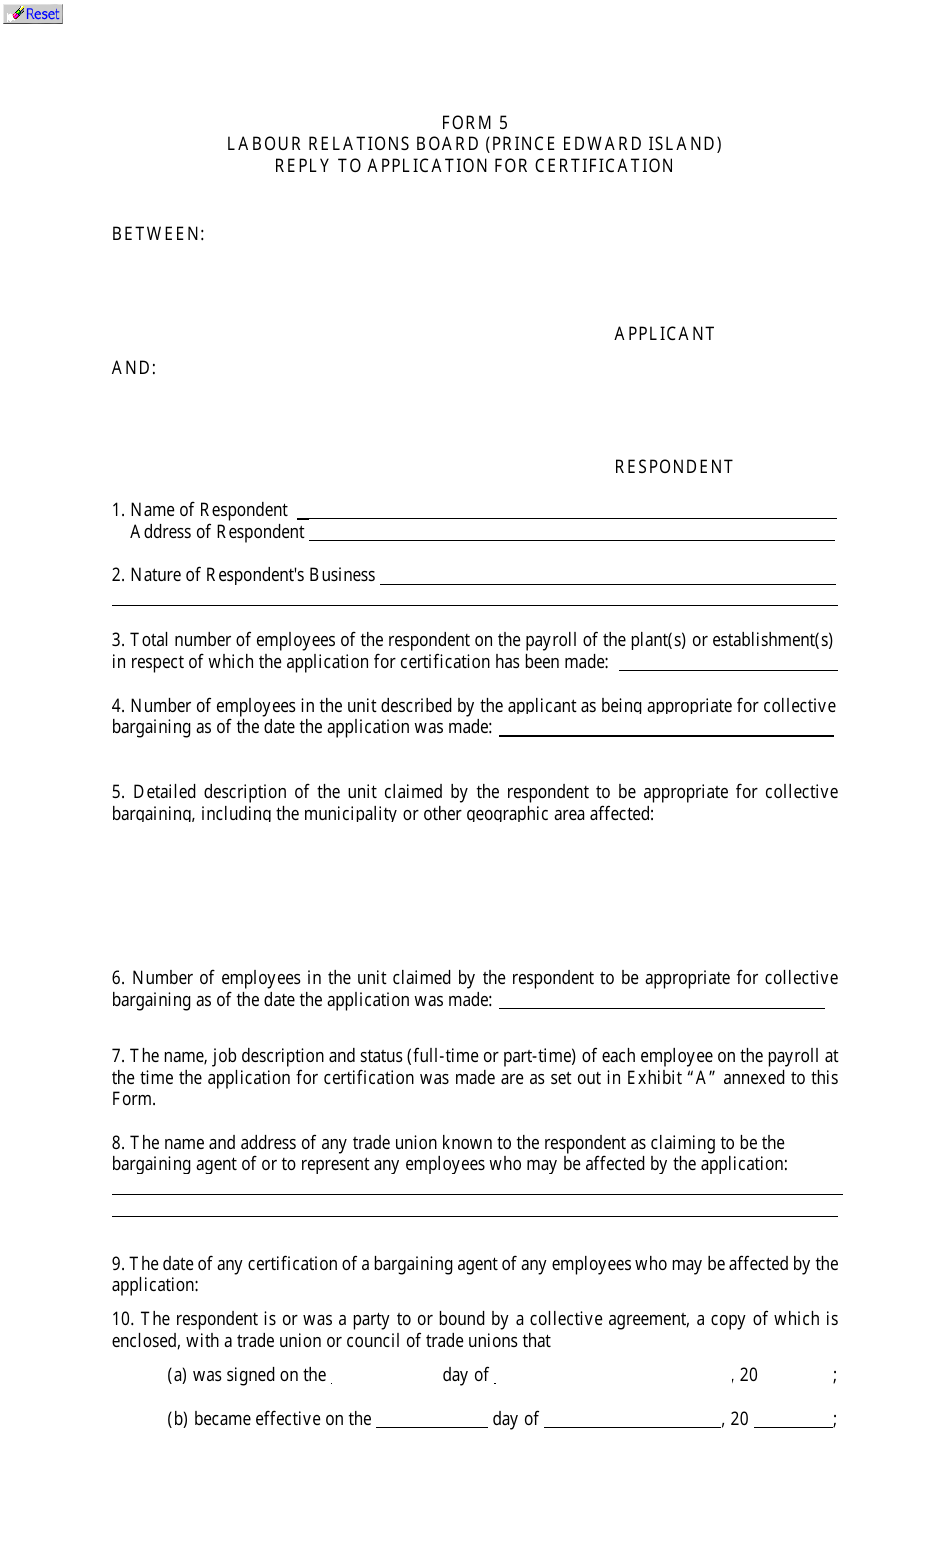 Form 5 Reply to Application for Certification - Prince Edward Island, Canada, Page 1